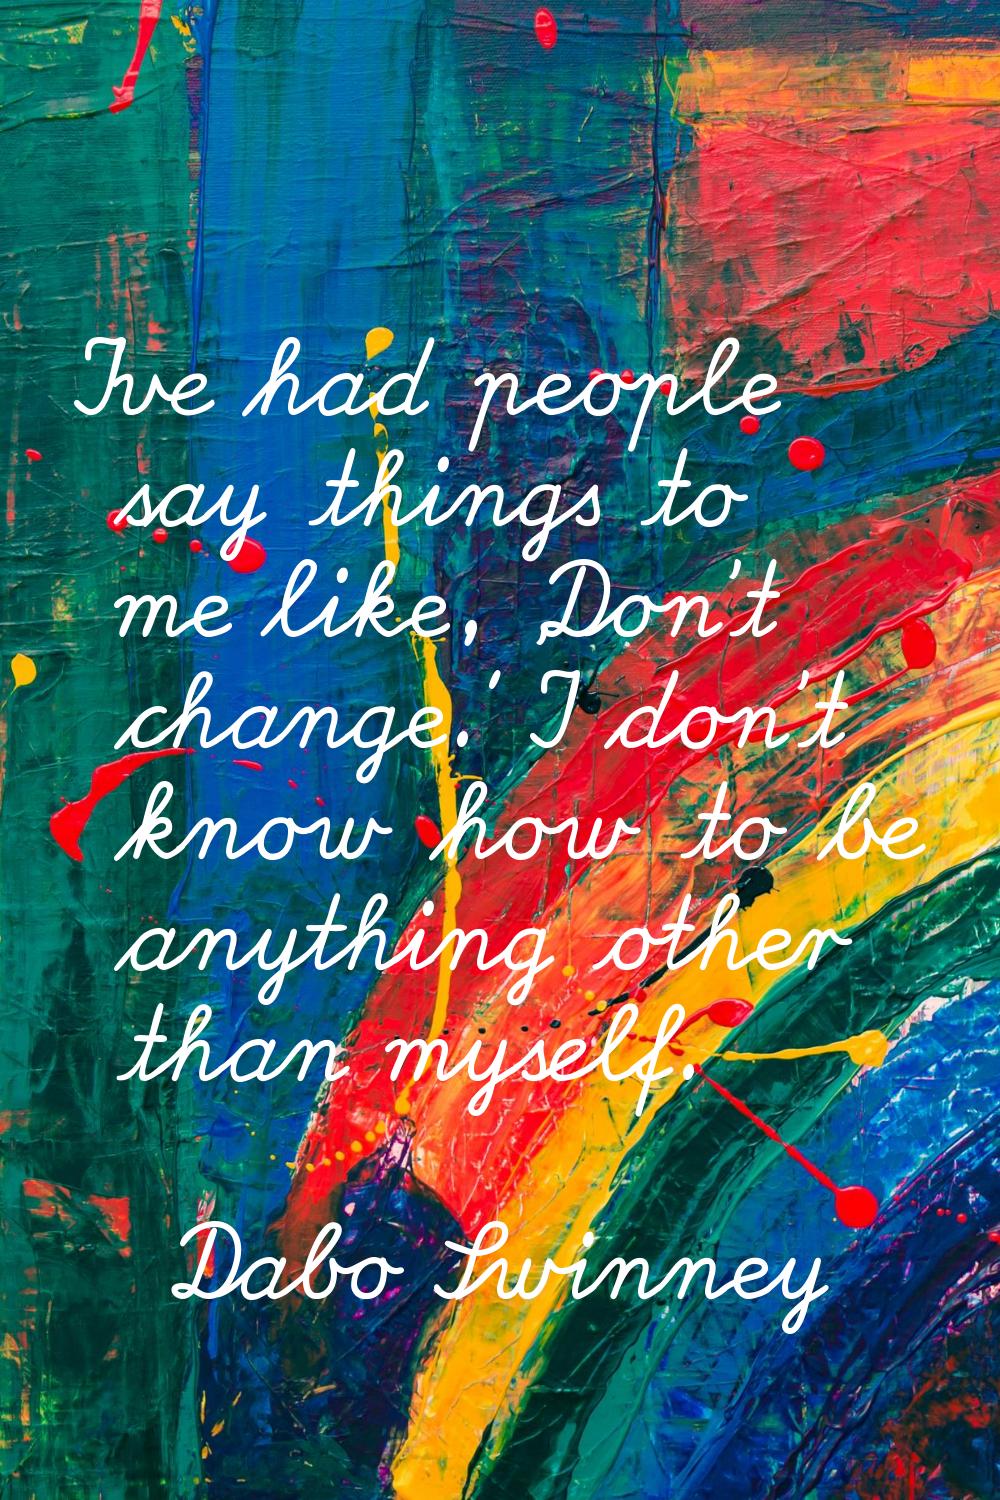 I've had people say things to me like, 'Don't change.' I don't know how to be anything other than m